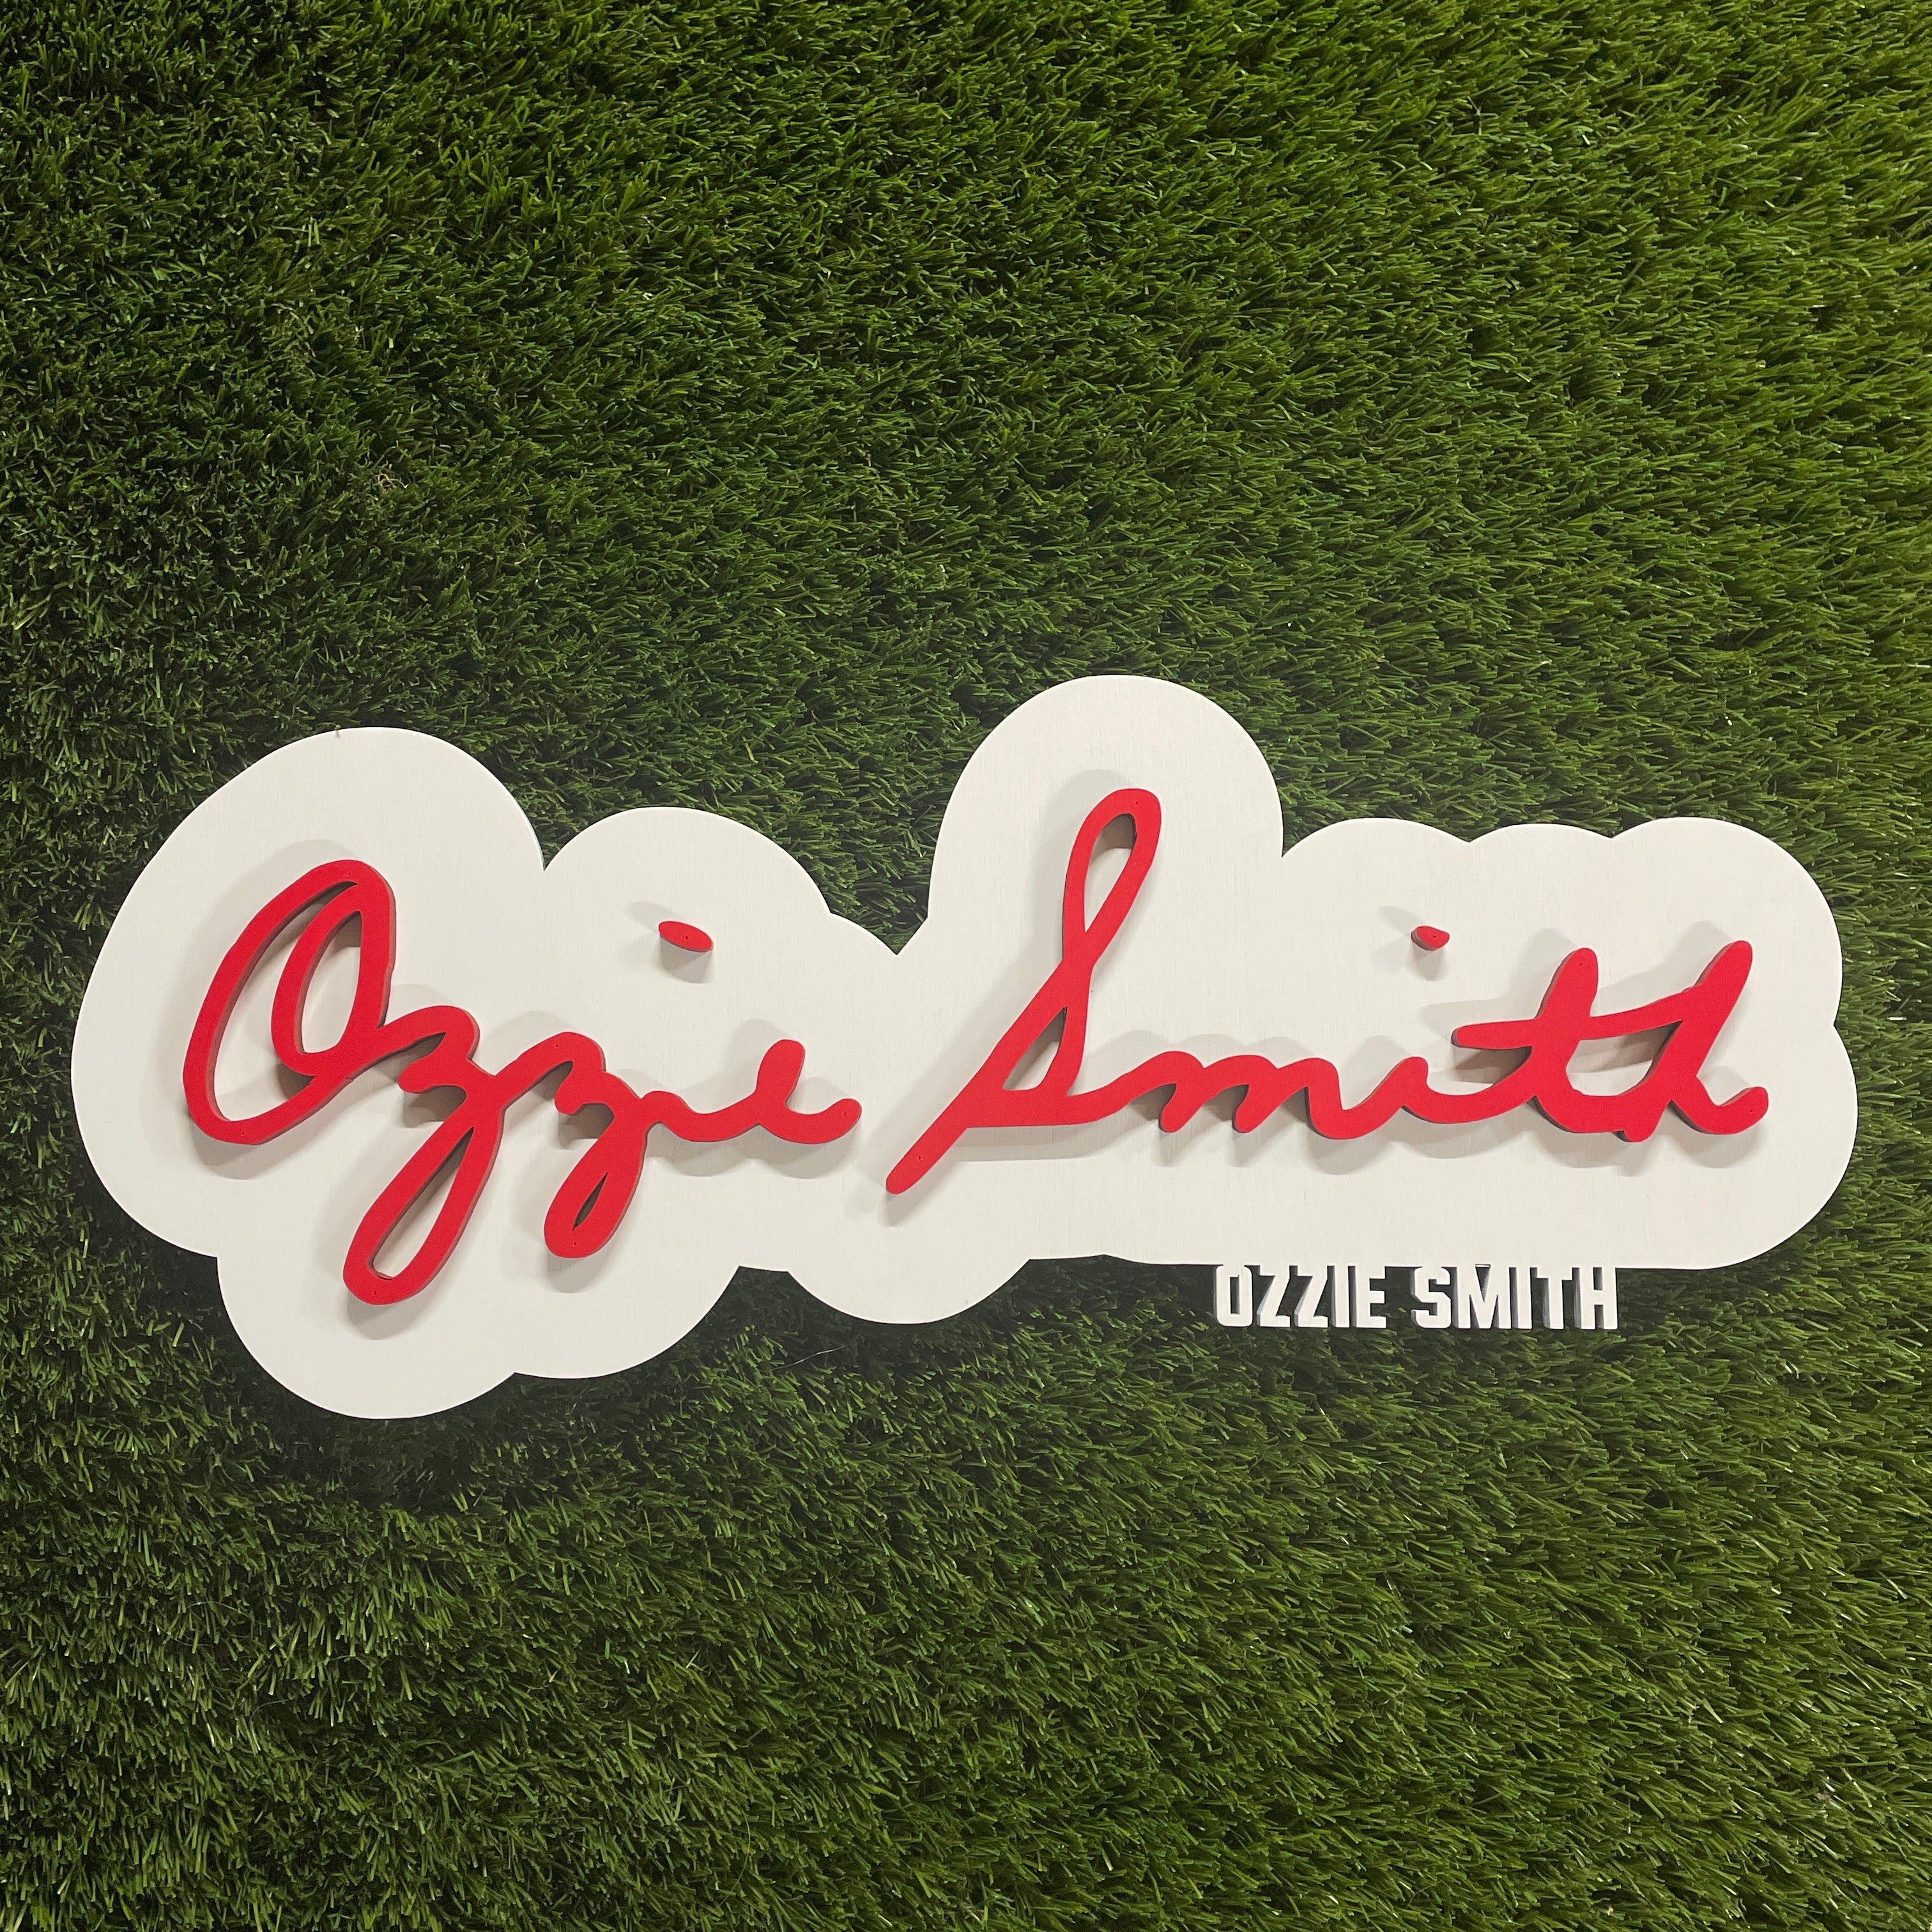 Ozzie Smith 3D Signature Color Wood Wall Sign - Game Day Feels